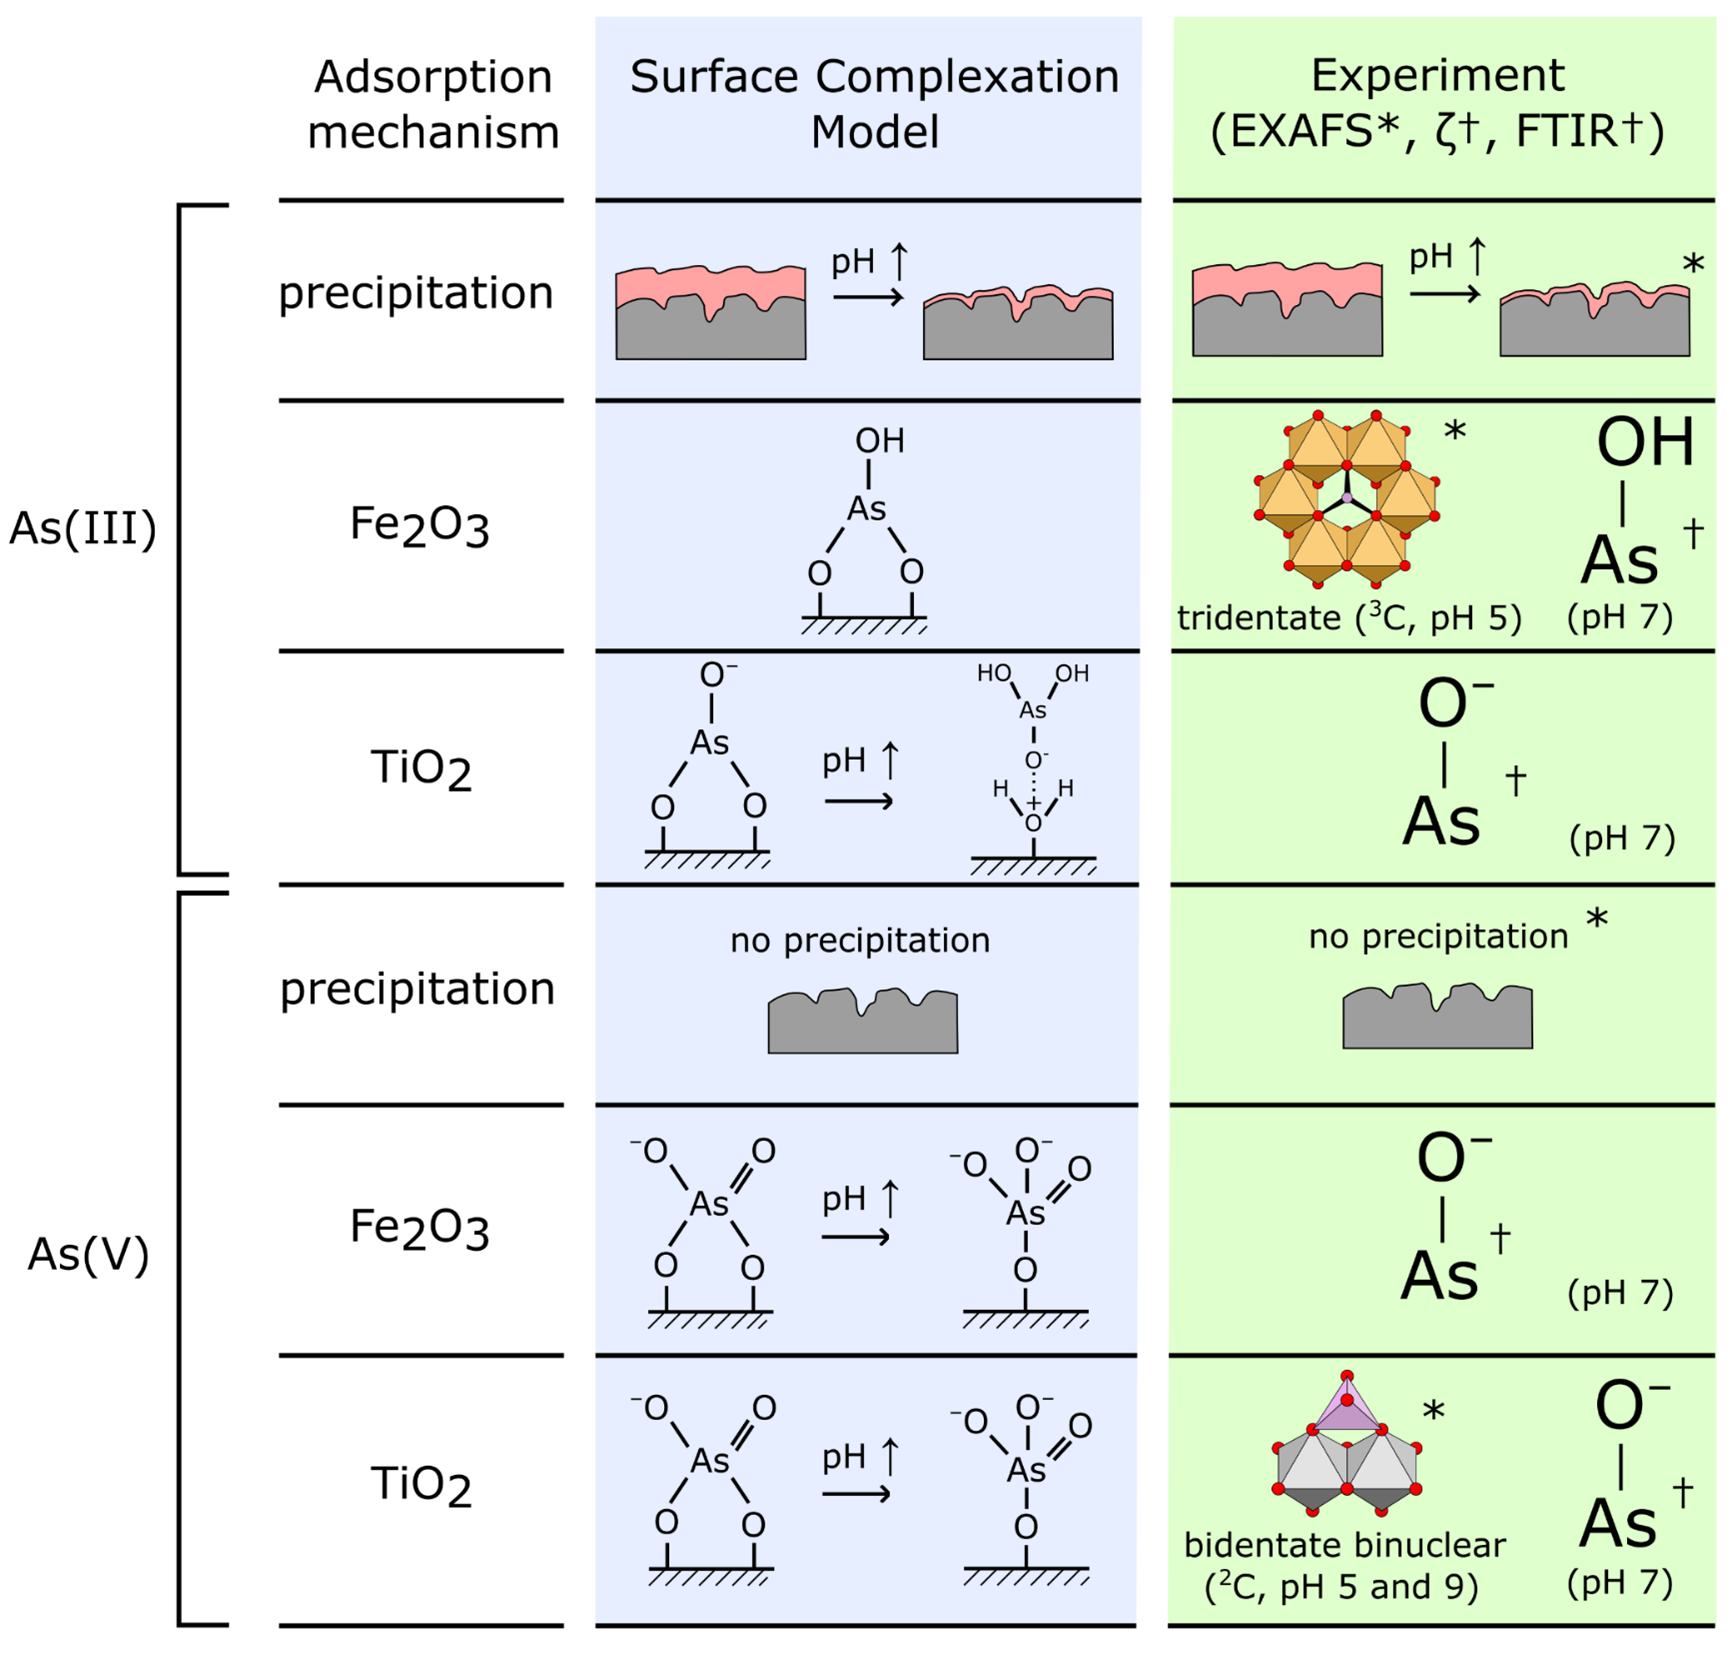 The authors combined spectroscopic data obtained at Diamond Light Source (EXAFS) with FTIR and zeta potential measurements at Imperial College London to develop a picture of the dominant surface complexes formed when arsenic is adsorbed by TiO2/Fe2O3 composite nanomaterials. This was used to evaluate and verify the speciation of adsorbed arsenic predicted by the authors’ previous Surface Complexation Model (SCM), a theoretical model that is able to predict changes in adsorption as a function of environmental conditions. This model had been developed using surface complexes chosen based on data for pure titania and pure iron oxides, with experimental evidence for arsenic speciation on composite TiO2/Fe2O3 not being available prior to the Diamond Lightsource study.<br/>Arrows indicate where the pH is increased from 5 to 9. Asterixes (*) and daggers † indicate evidence gained by EXAFS and FTIR/zeta potential analysis respectively. Image reused from DOI: 10.1016/j.rsurfi.2022.100084 under the CC BY 2.0 license.